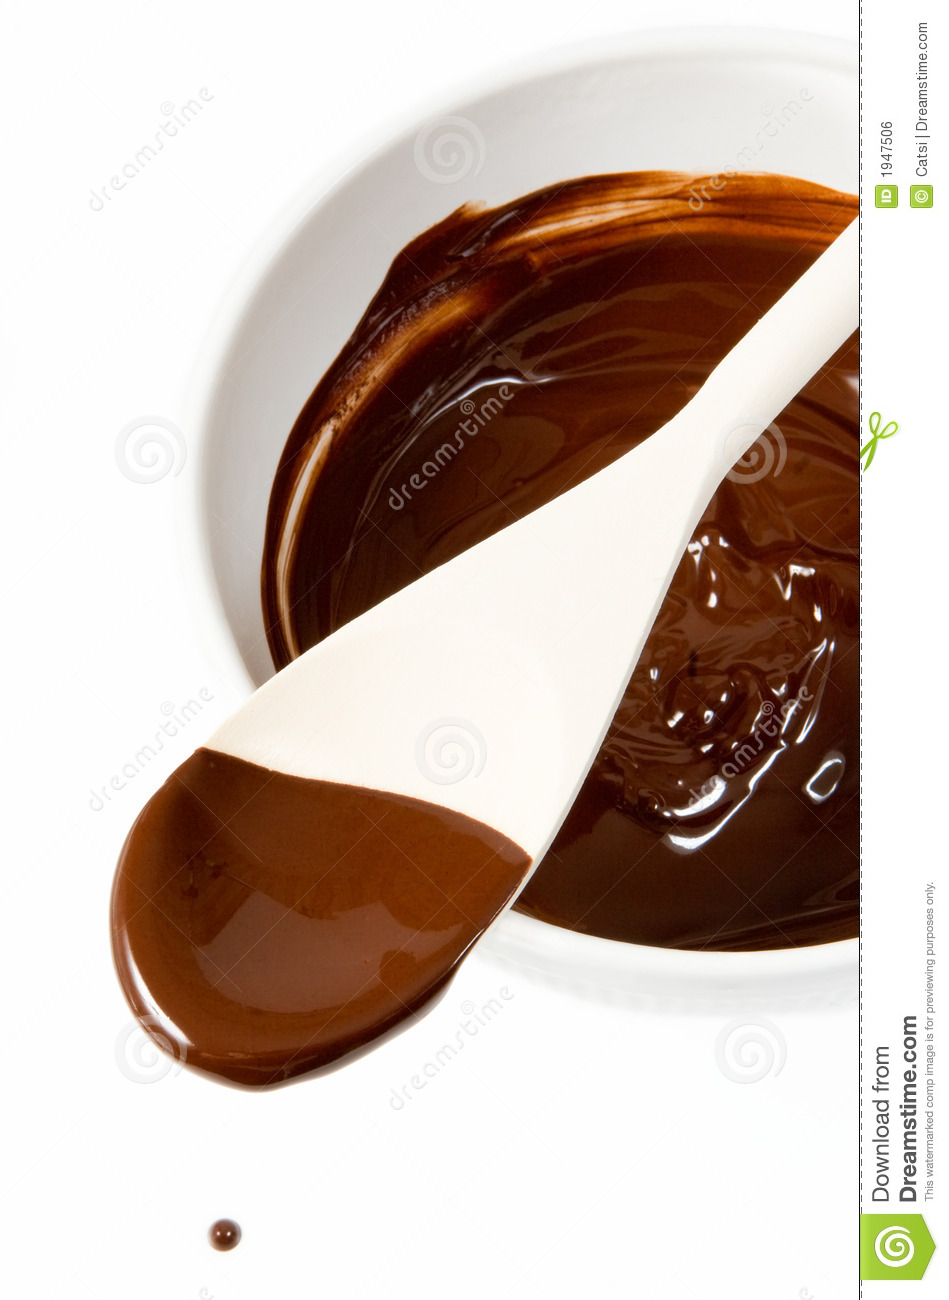 Melted Dark Chocolate Dripping From The Spoon Royalty Free Stock Image